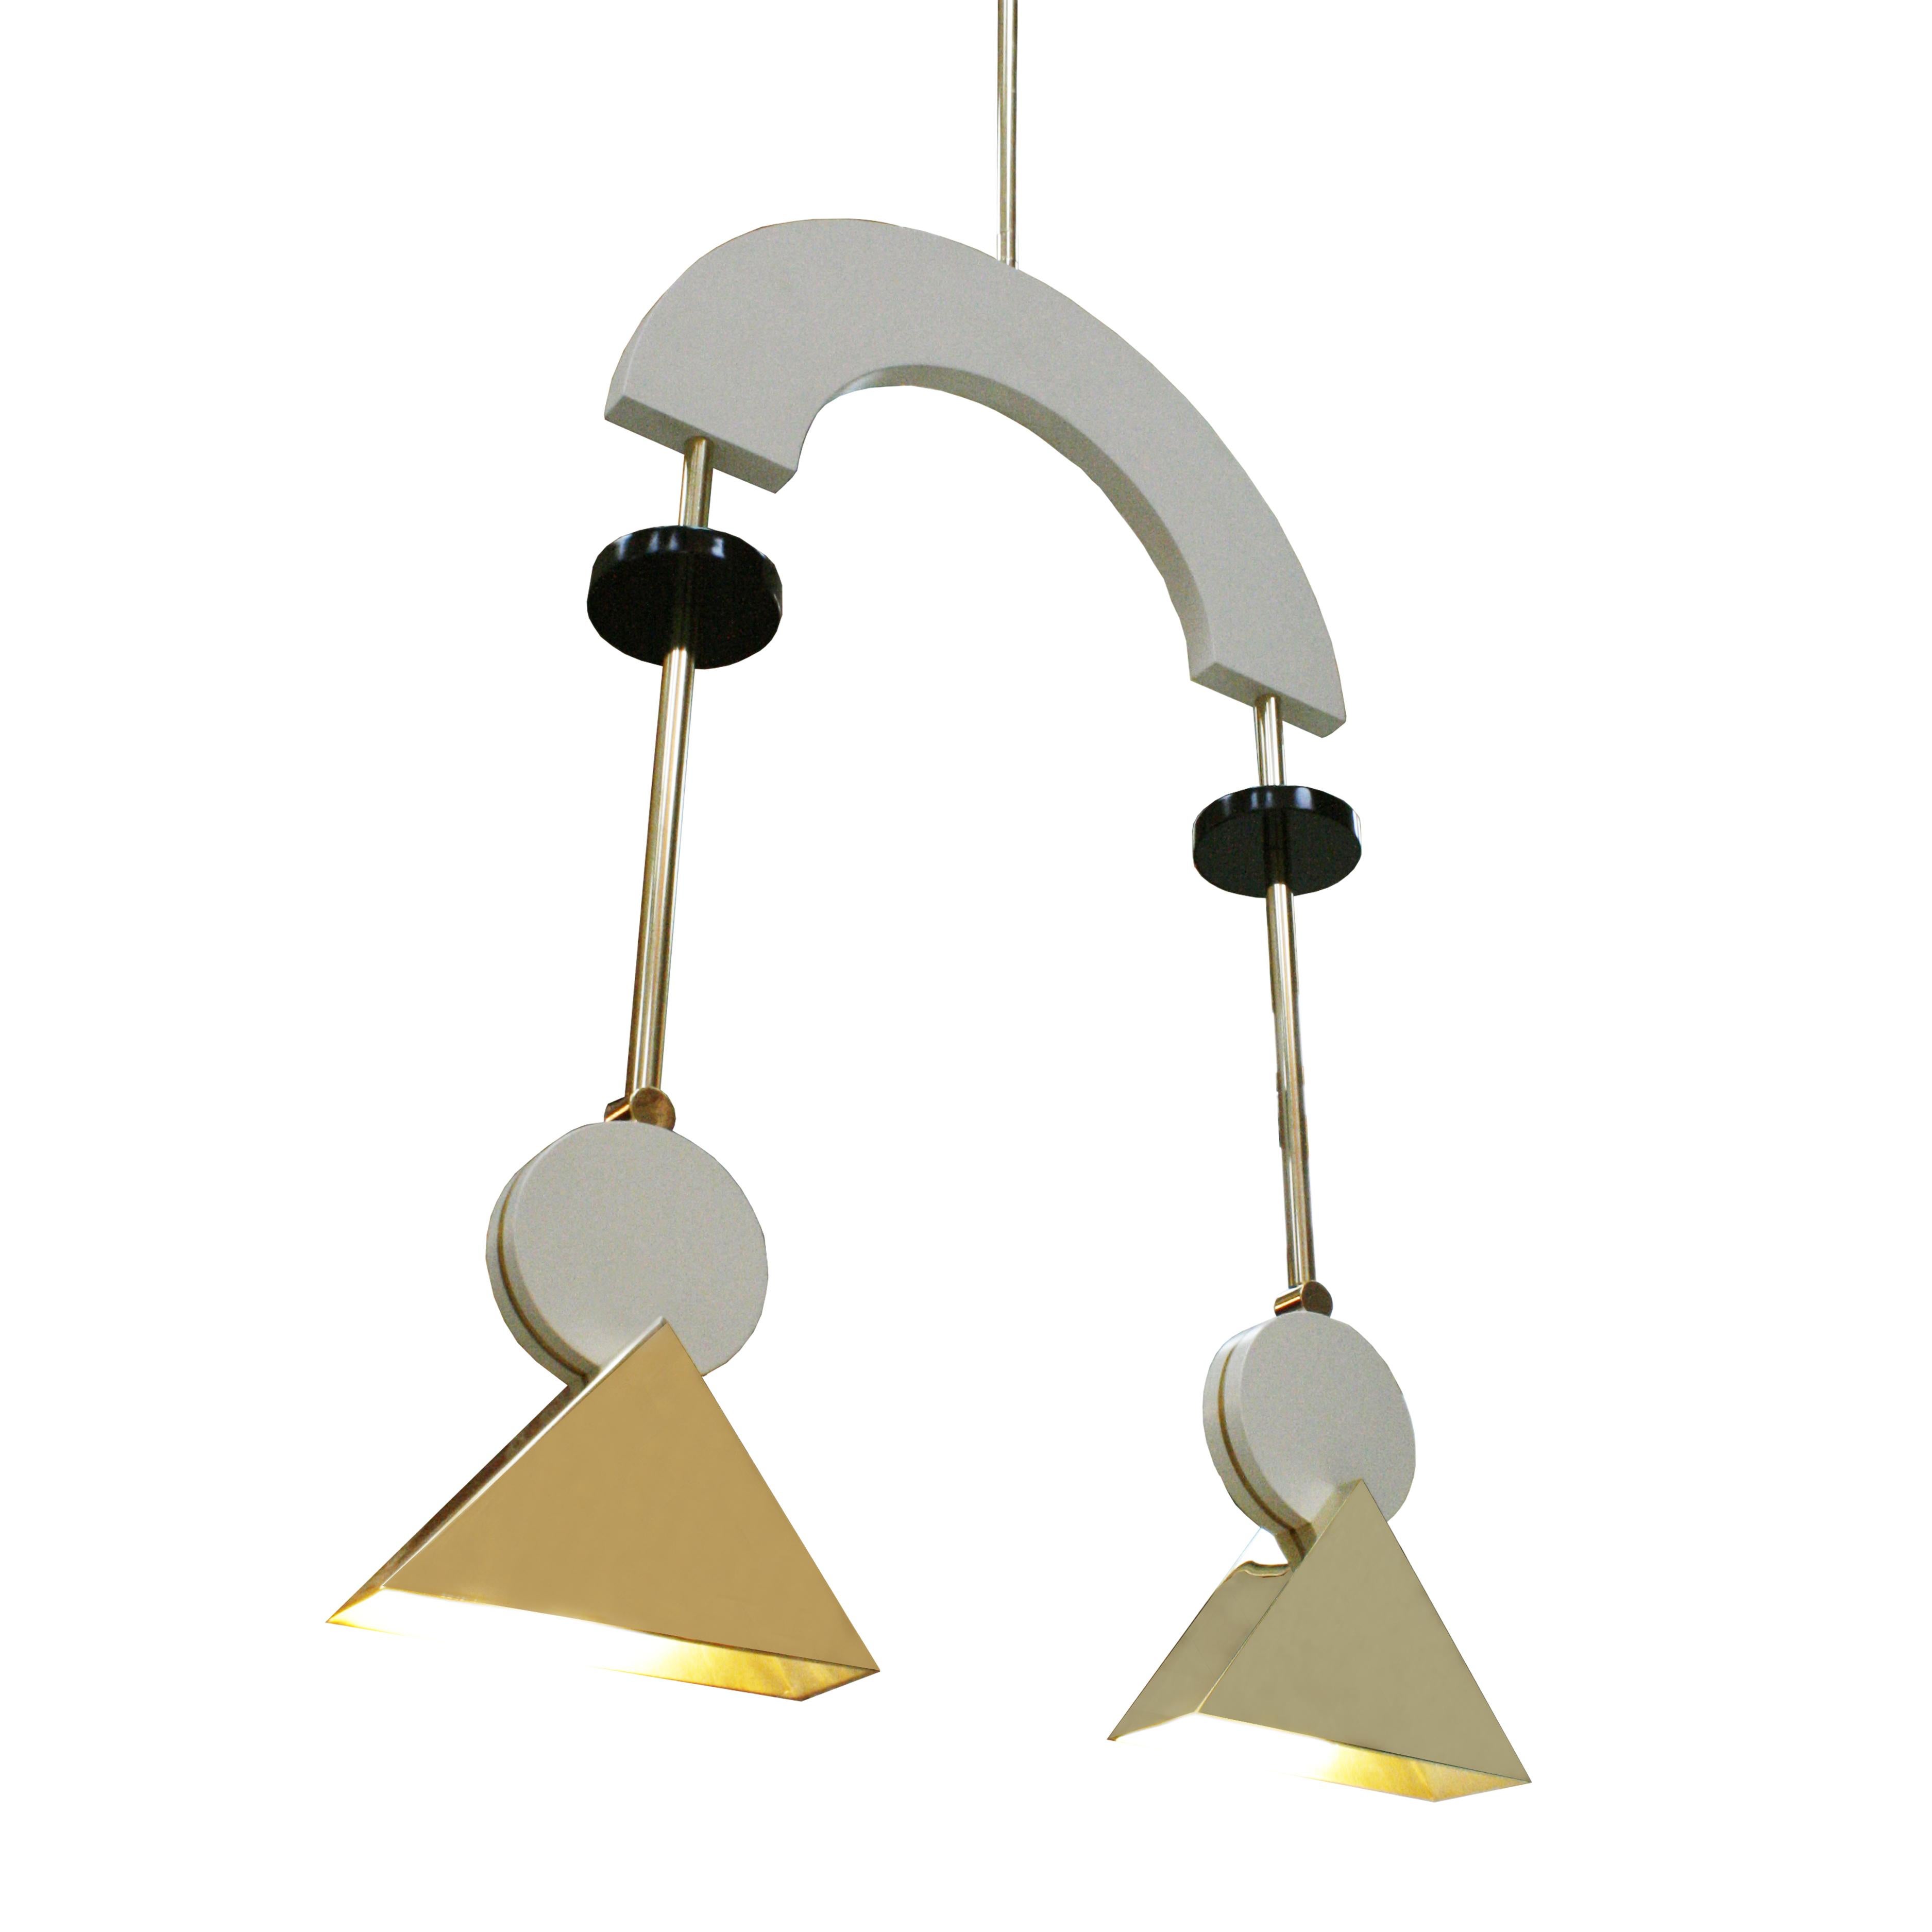 British Mid-Century Modern Style Pair of White Lacquered Wood and Bronze Pendant Lamps For Sale